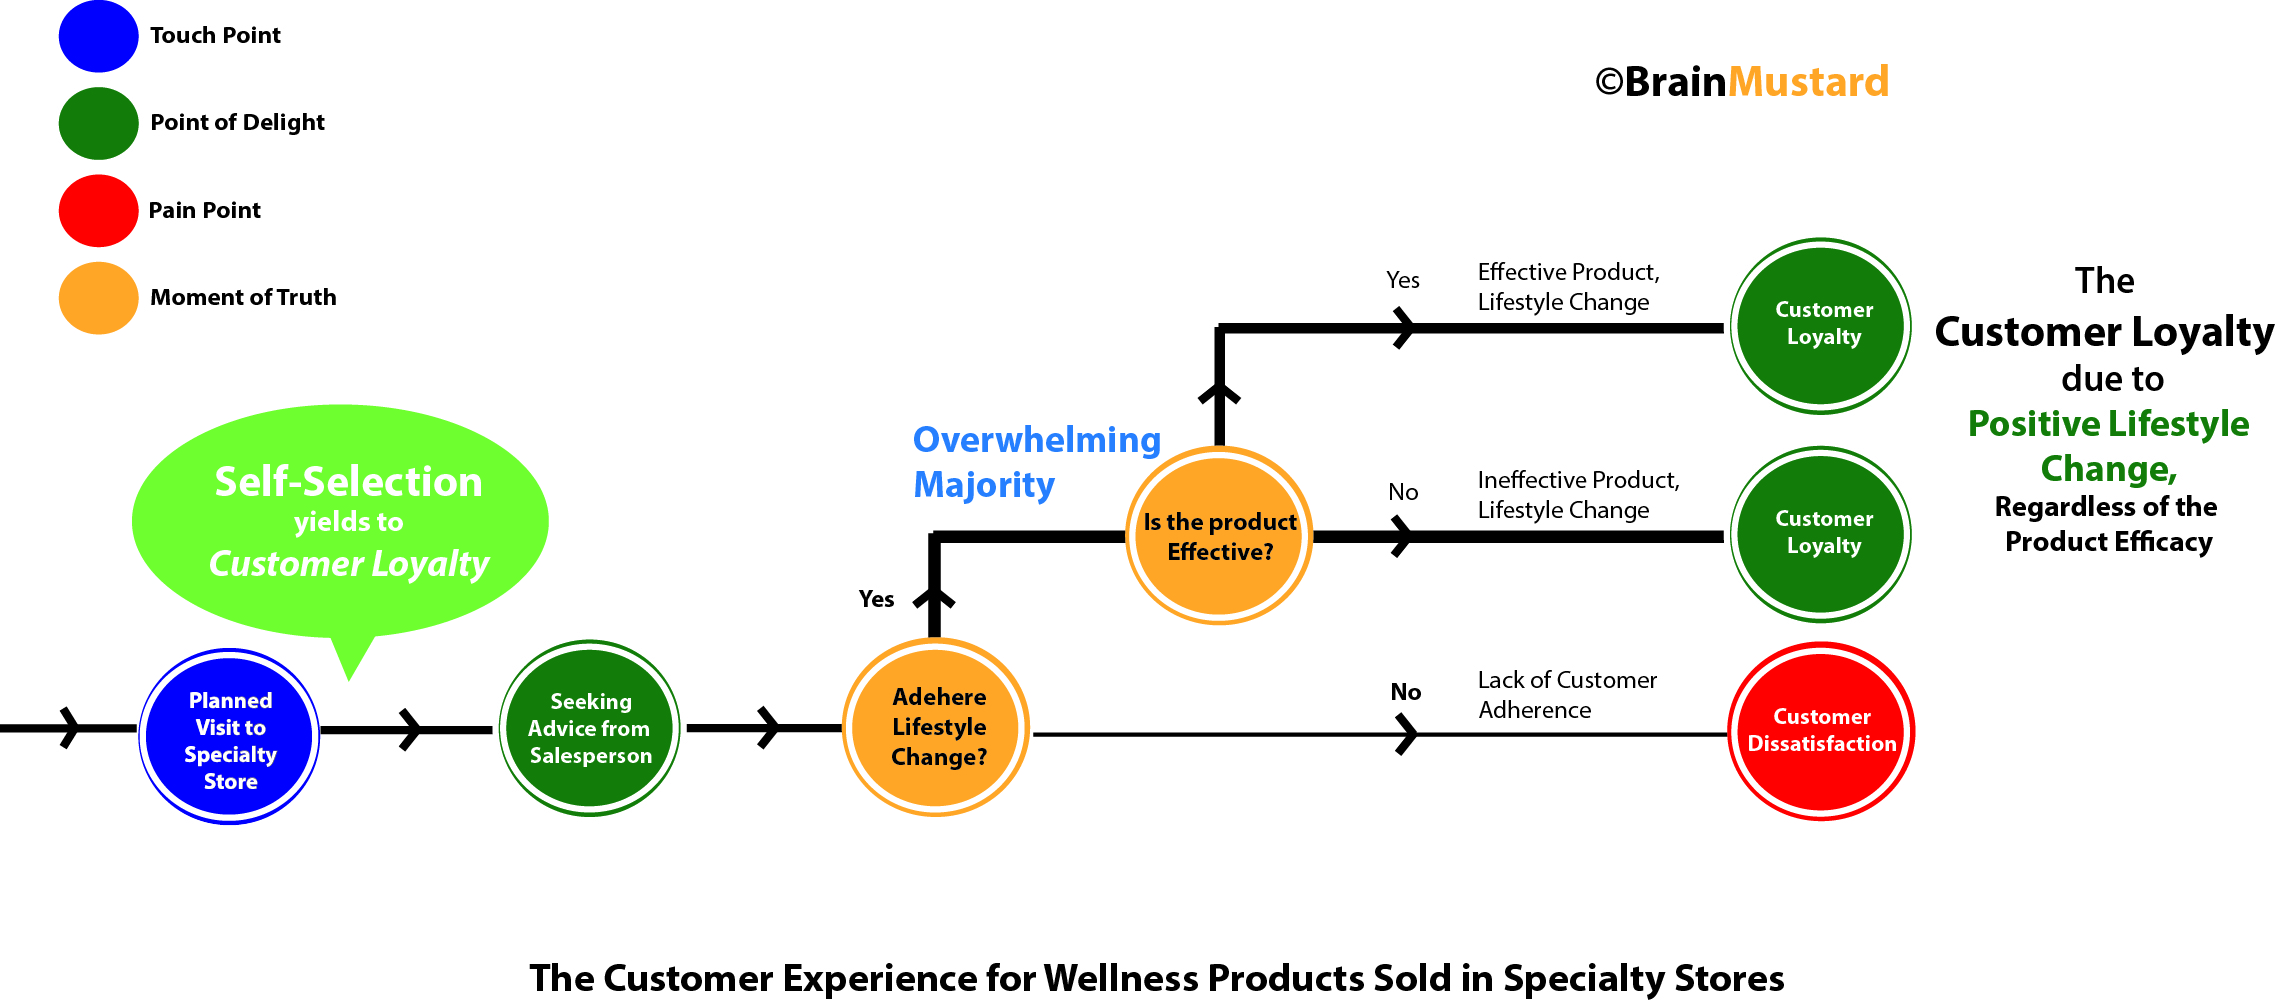 The Customer Experience Map for Specialty Wellness Stores